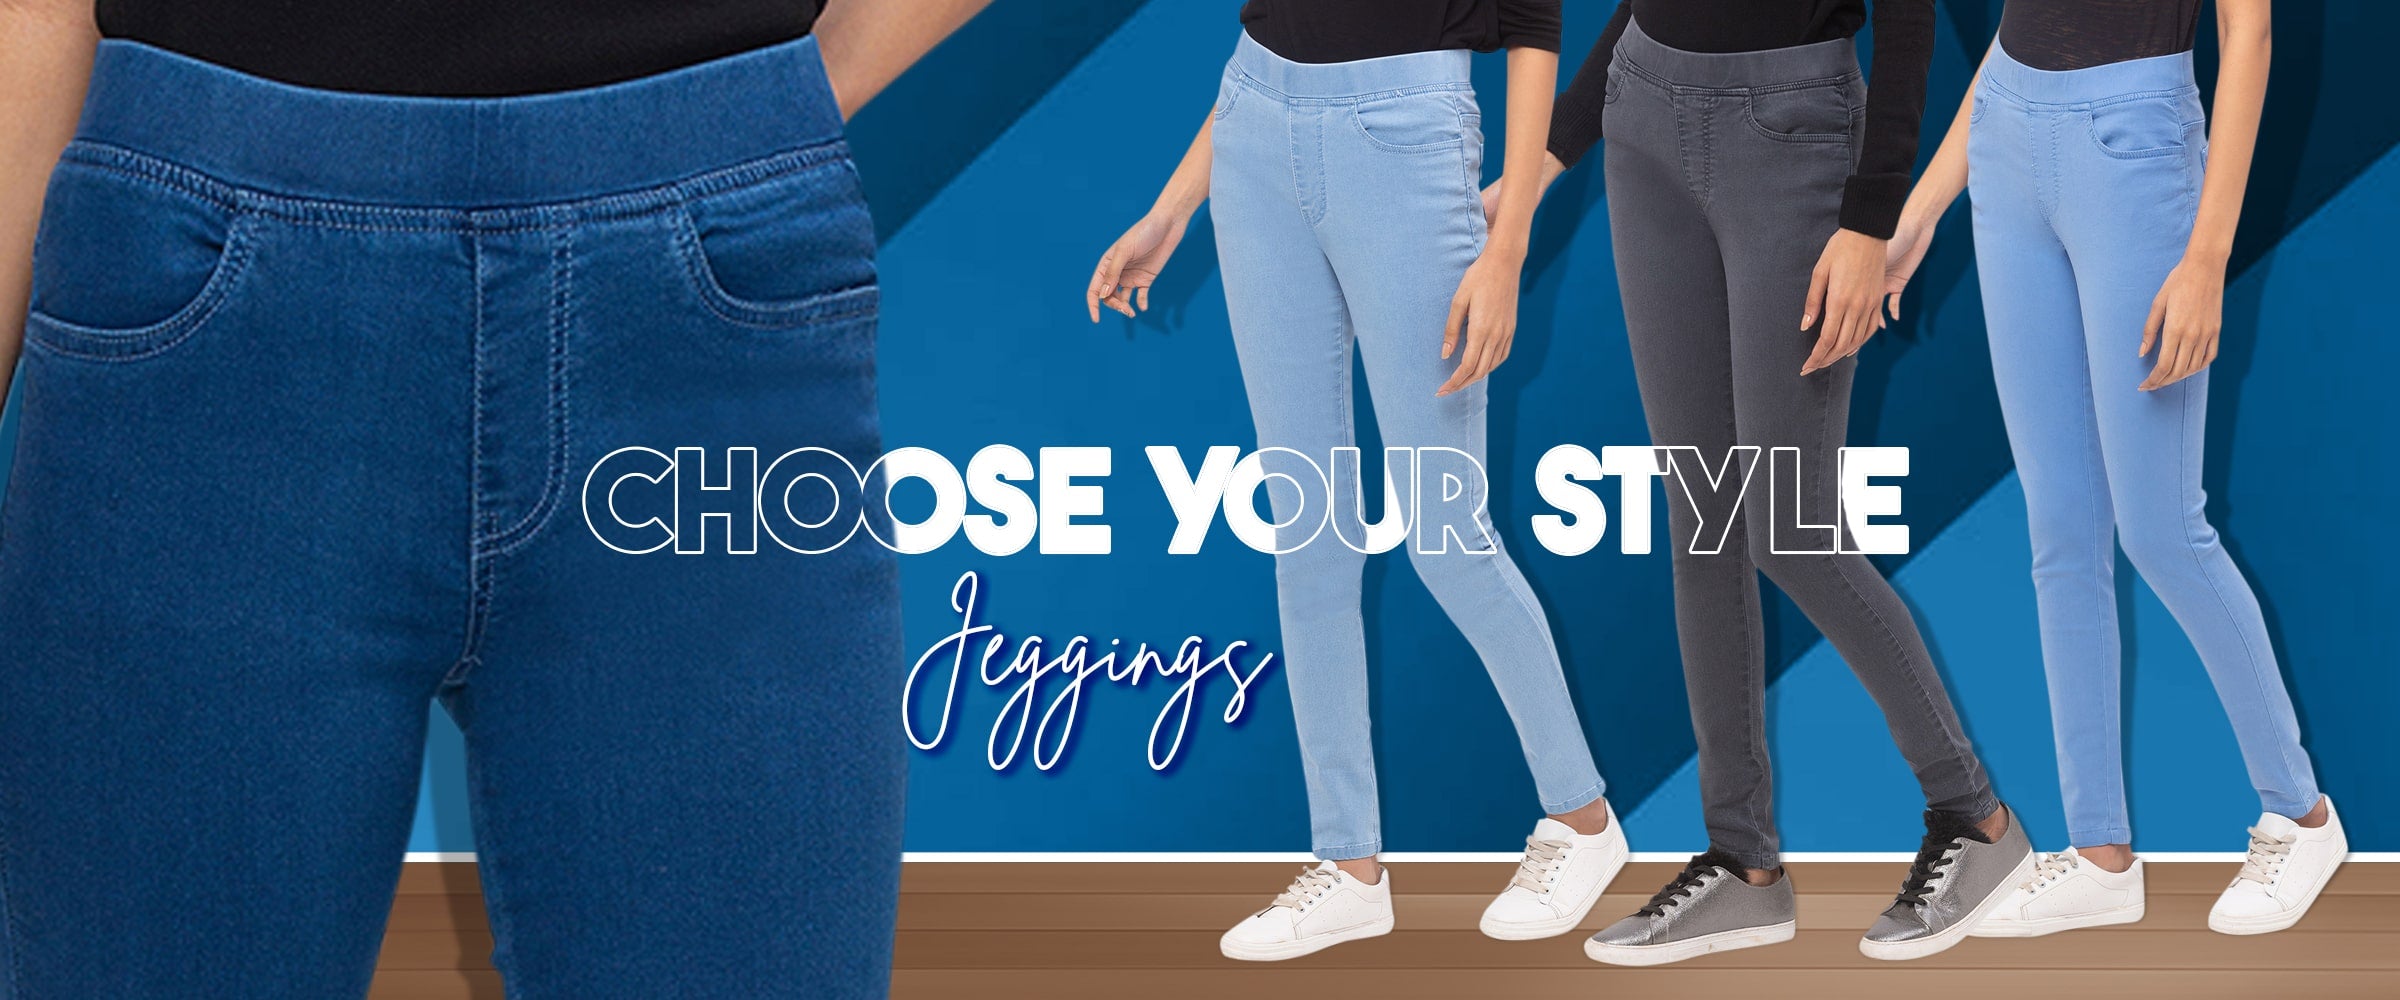 Effortlessly Stylish: Mastering Jeggings with formal Shirts for Everyday Chic